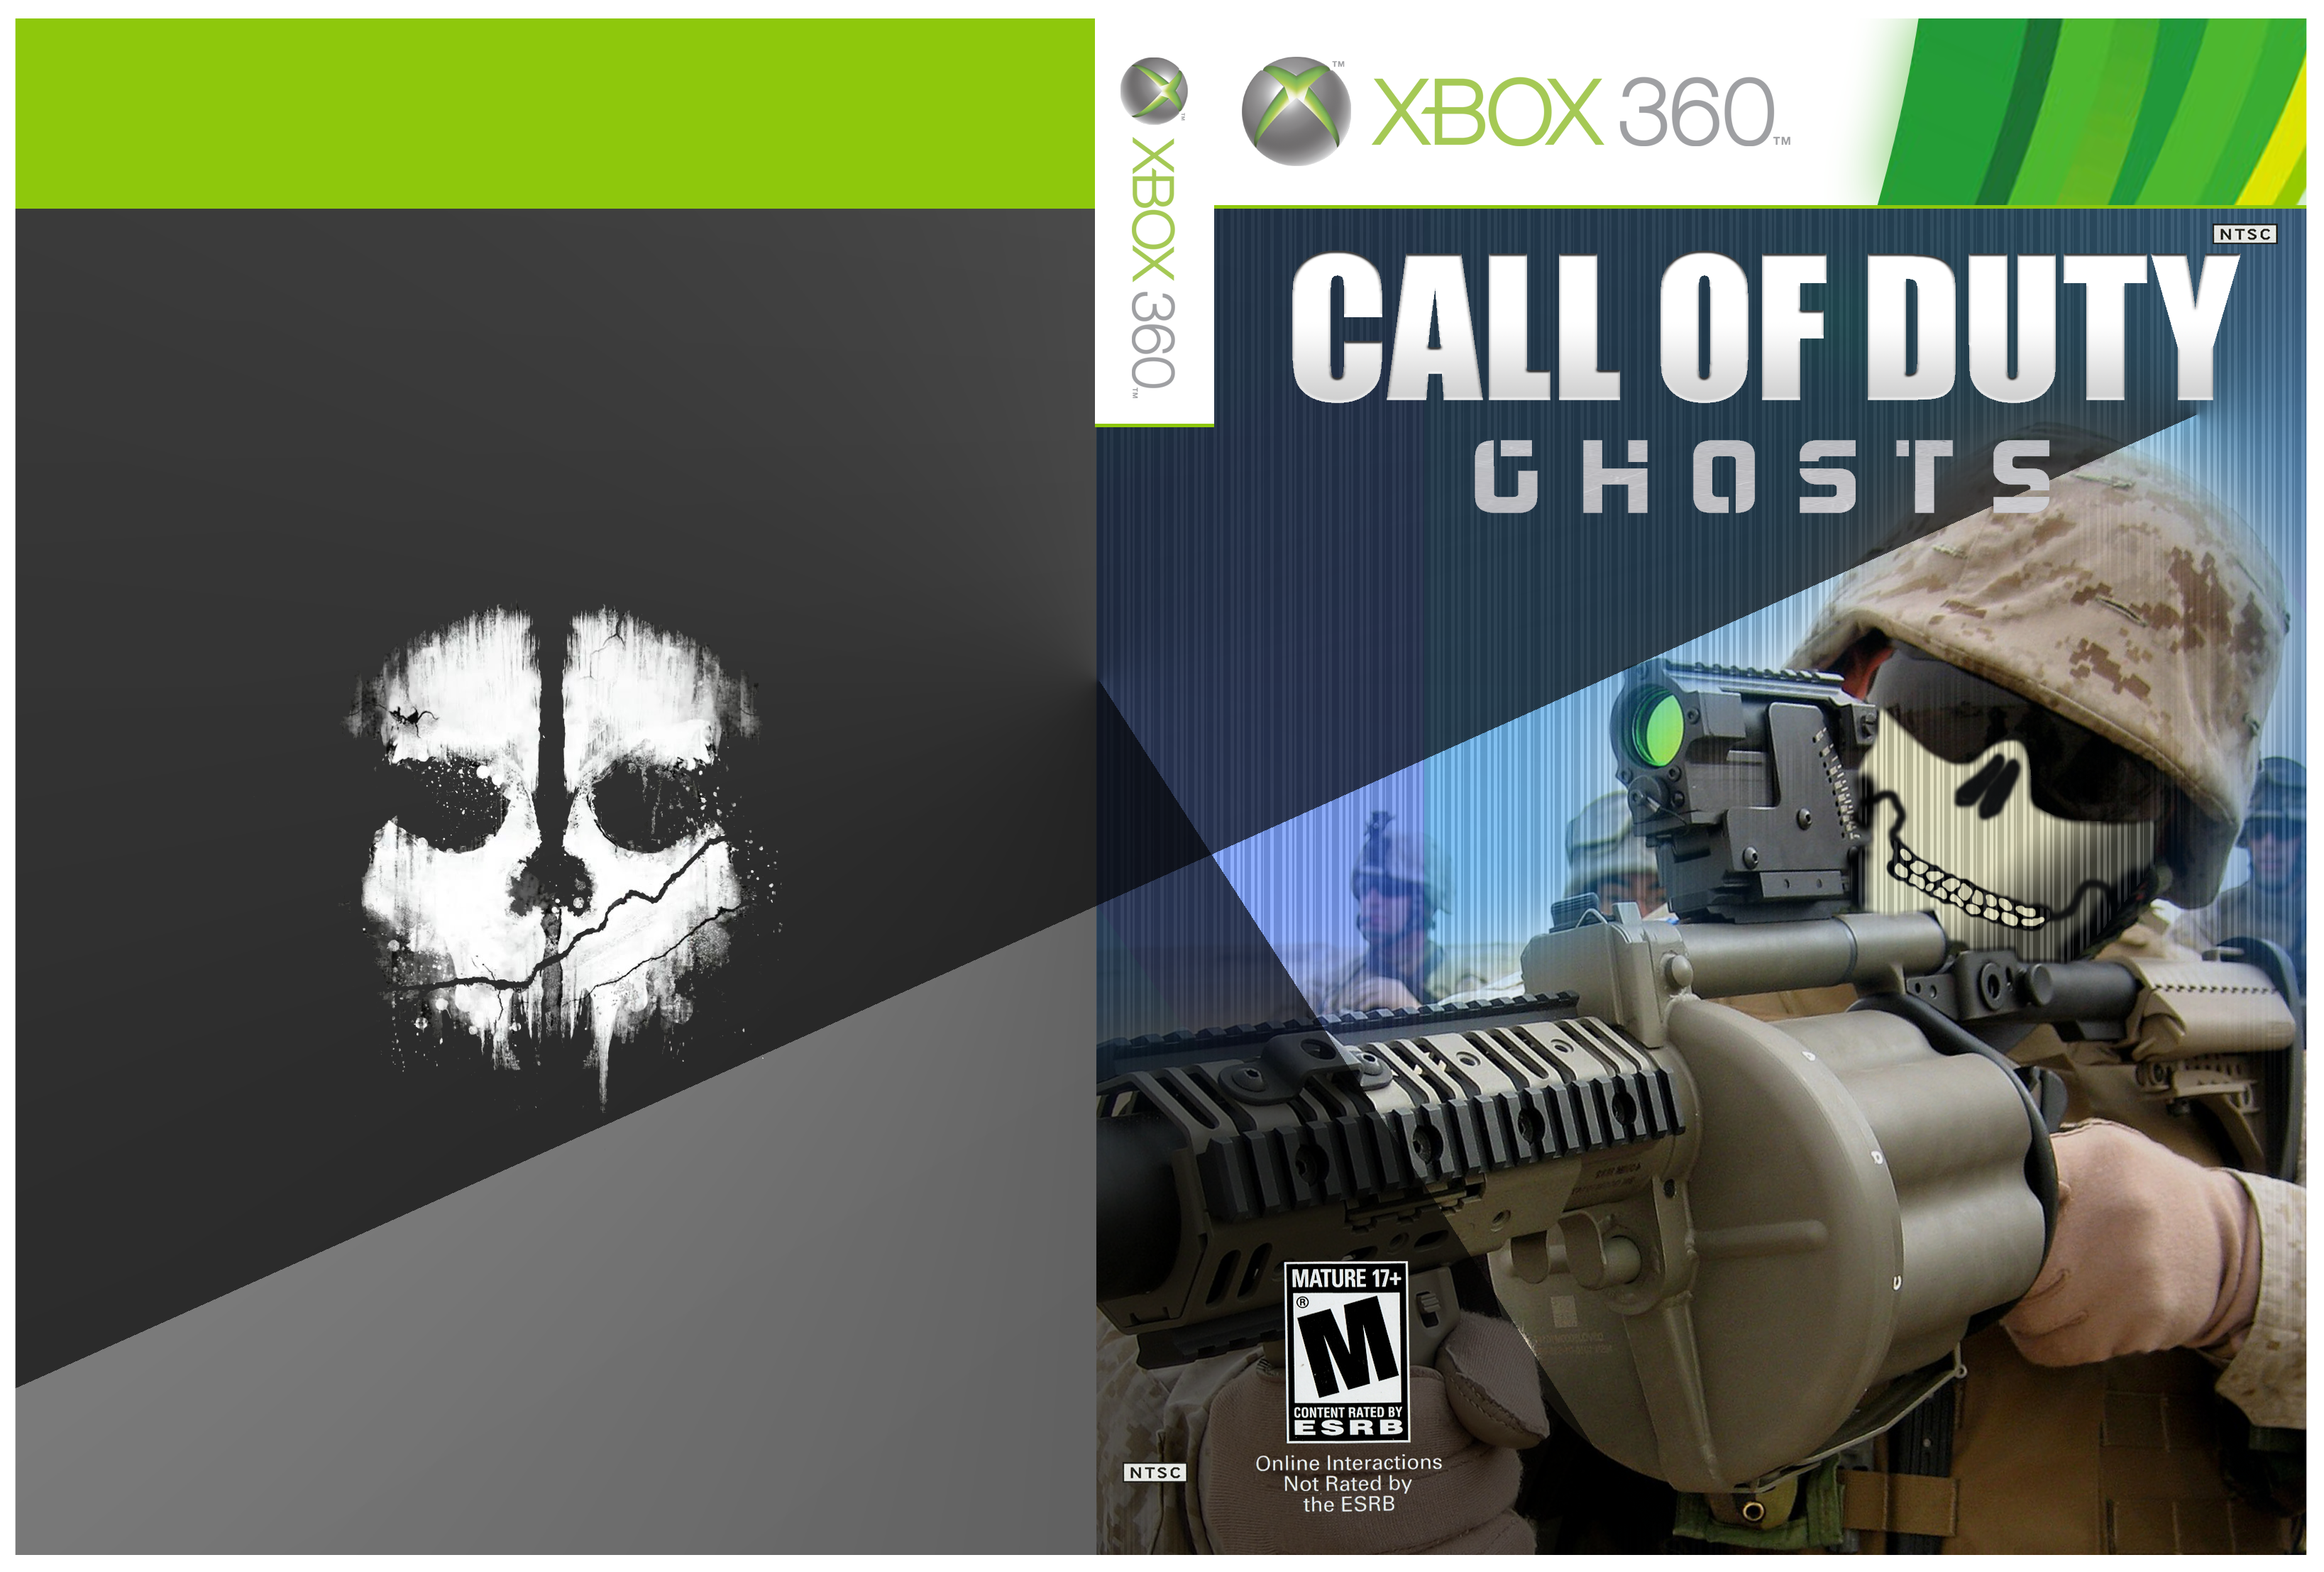 Call of Duty Ghosts box cover